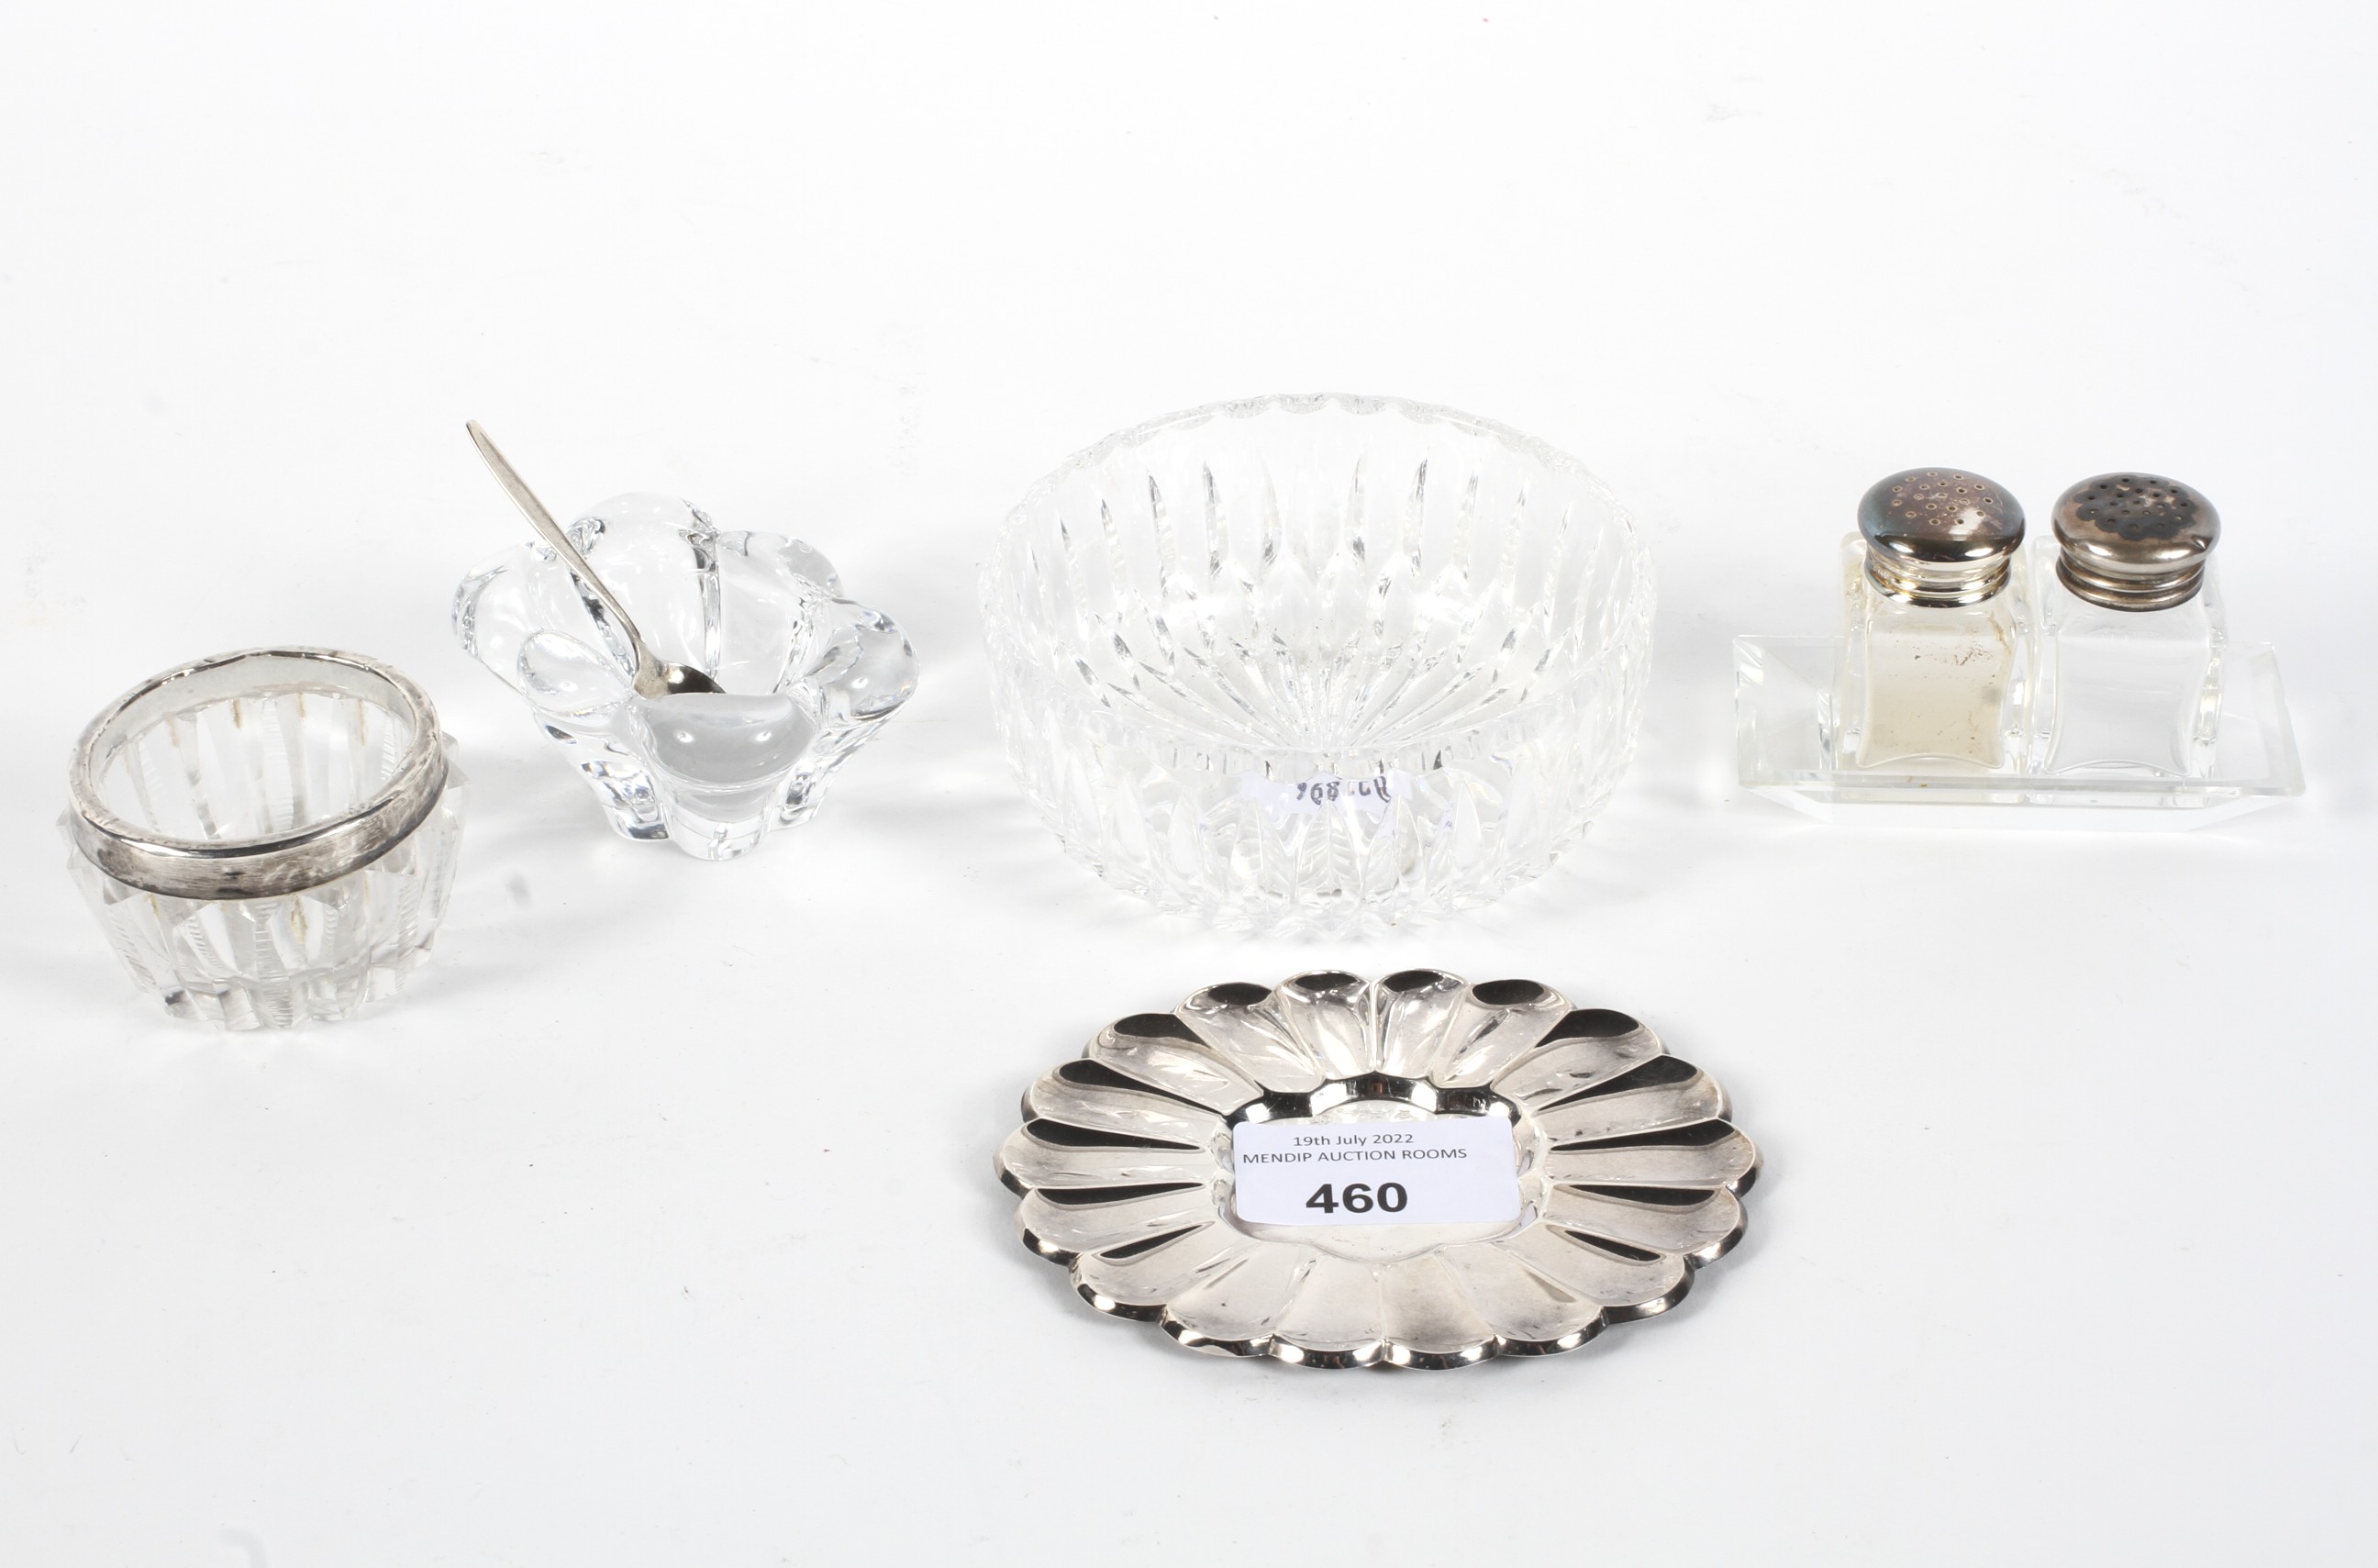 A collection of '925' silver and glassware.